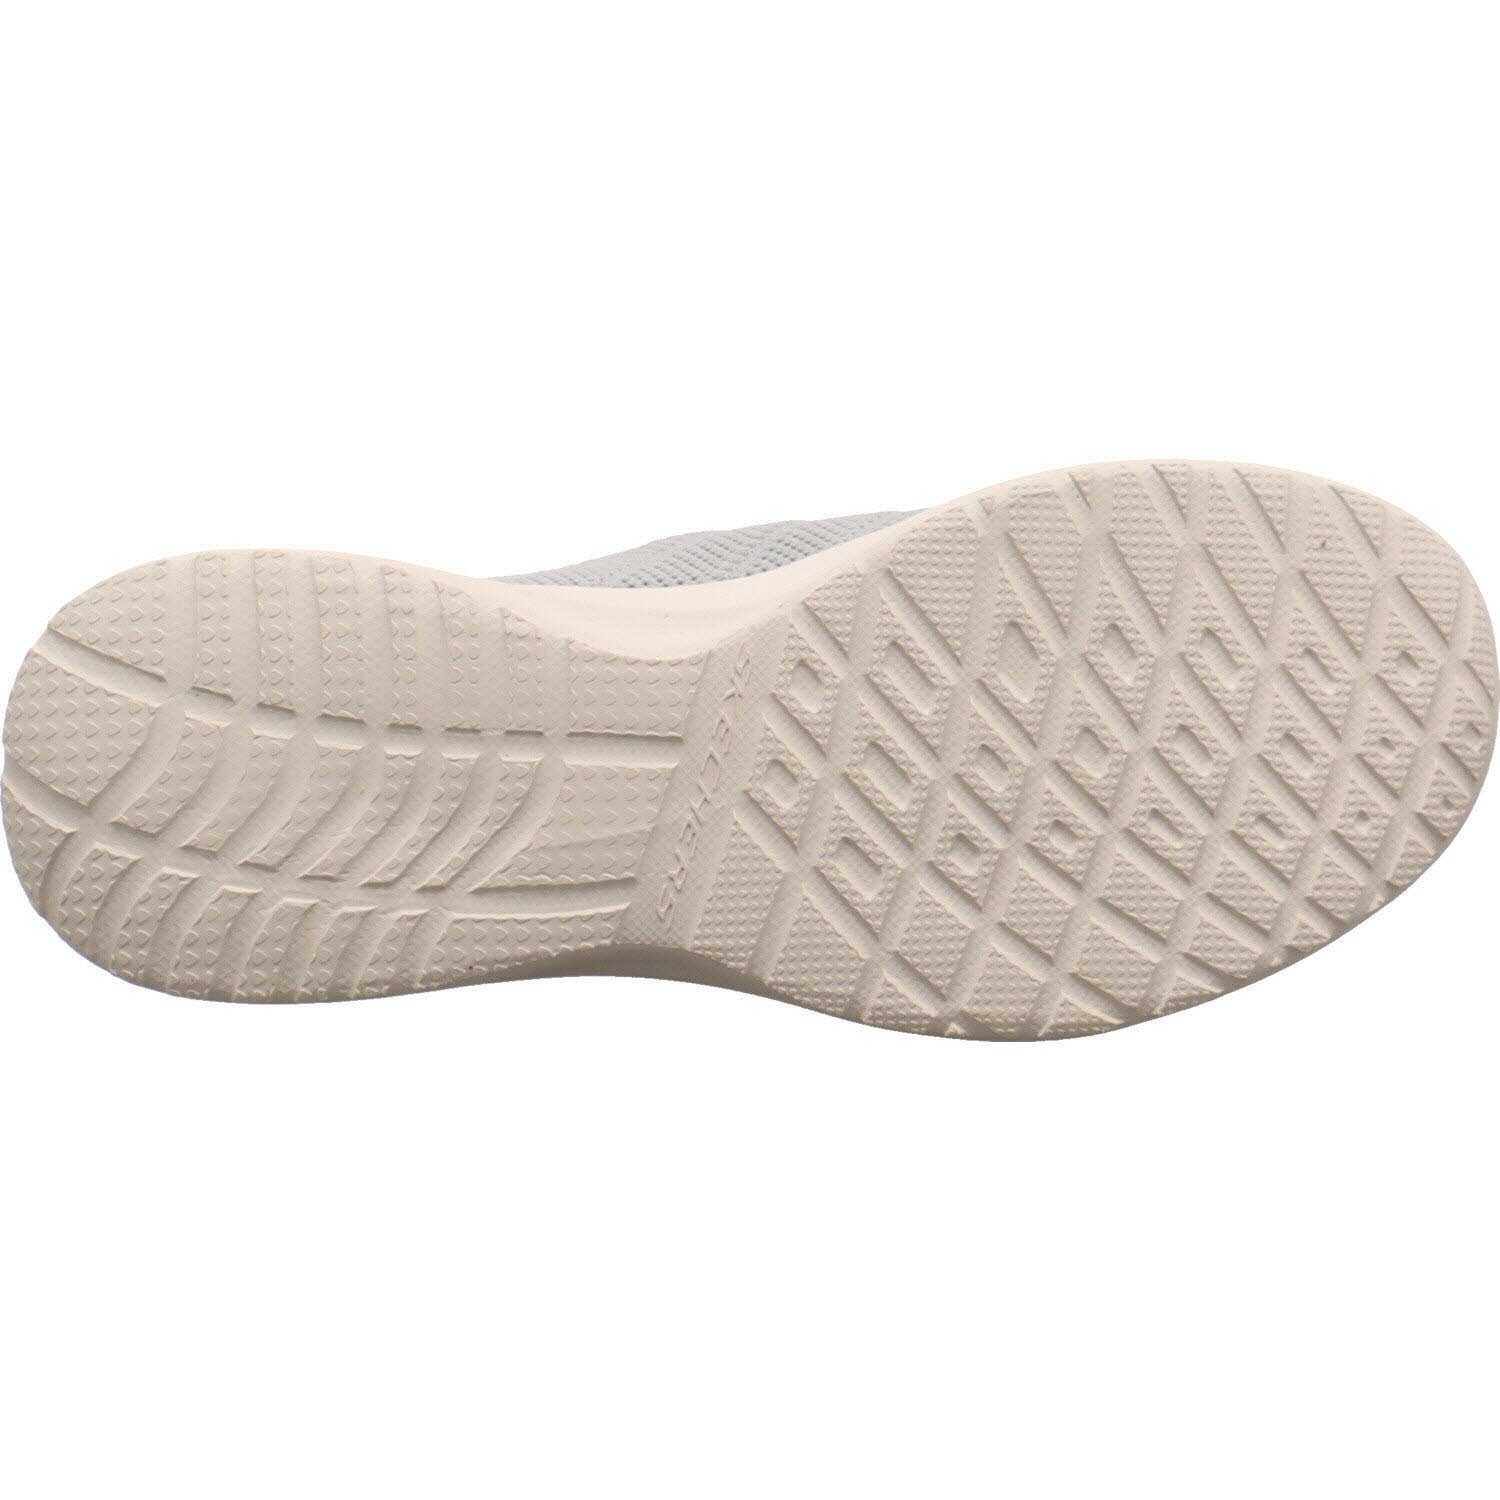 Slipper Dynamight Perfects - Skech-Air Skechers